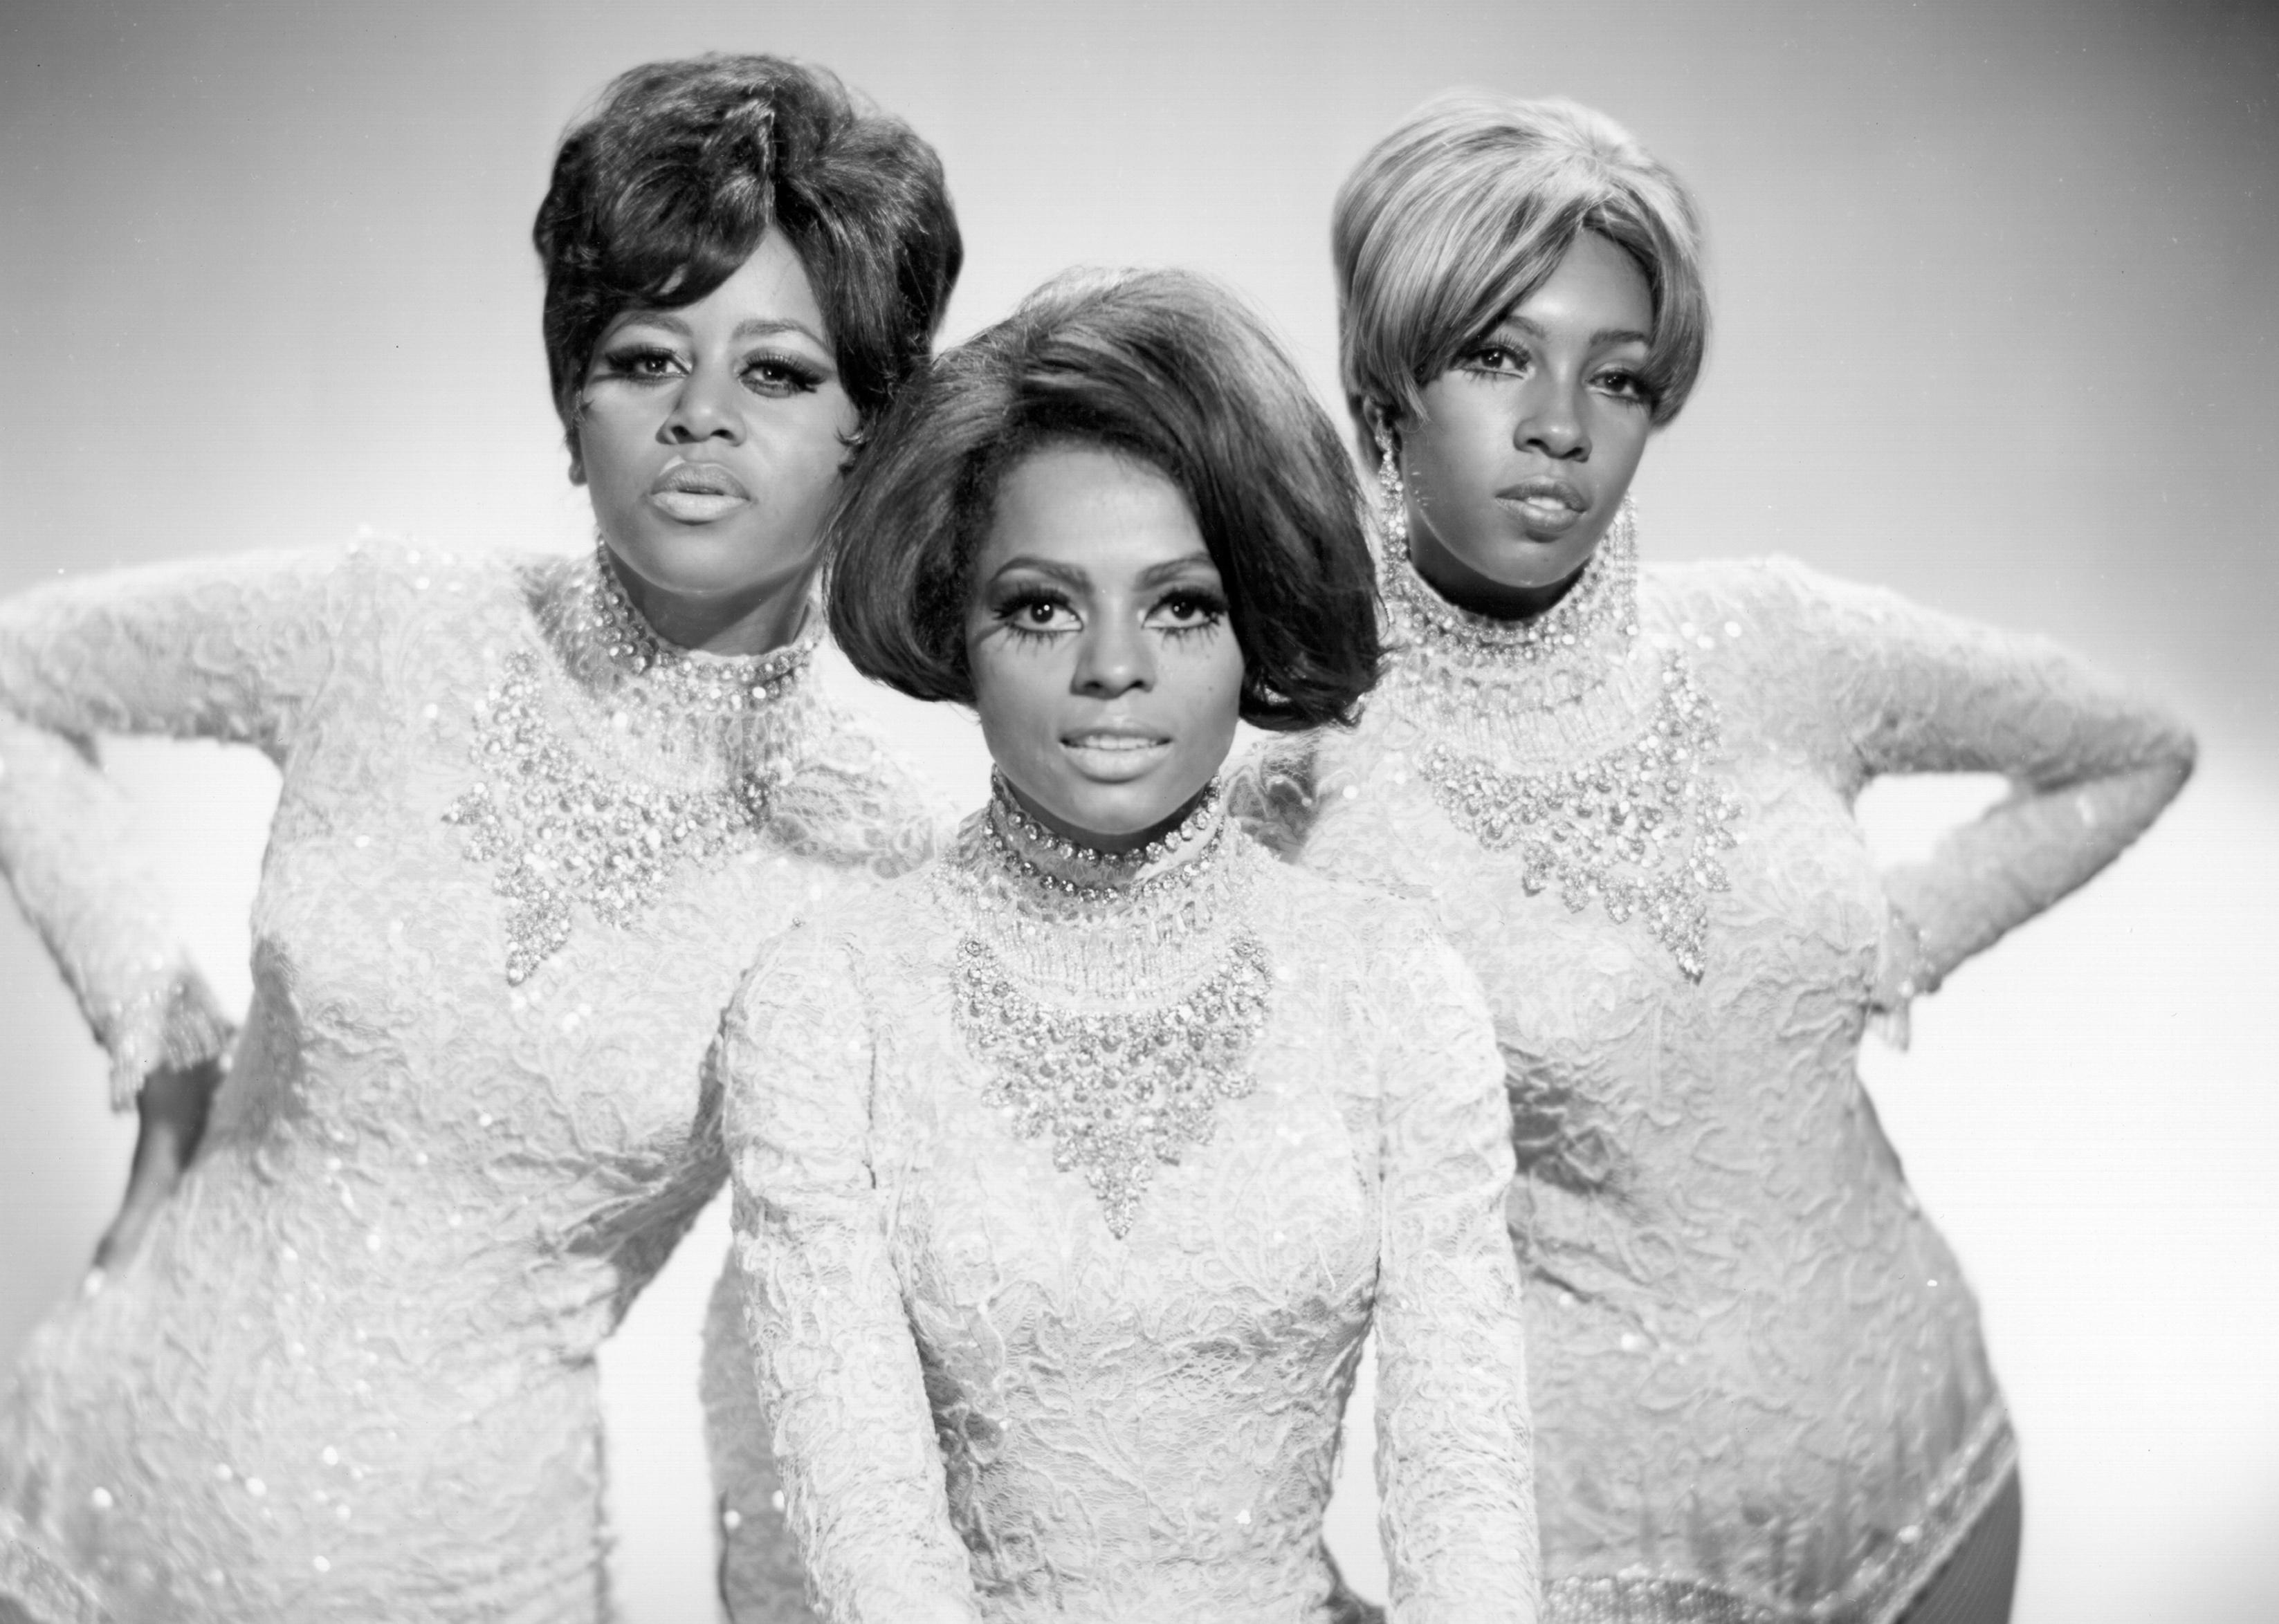 Photo of Cindy Birdsong and the Supremes.